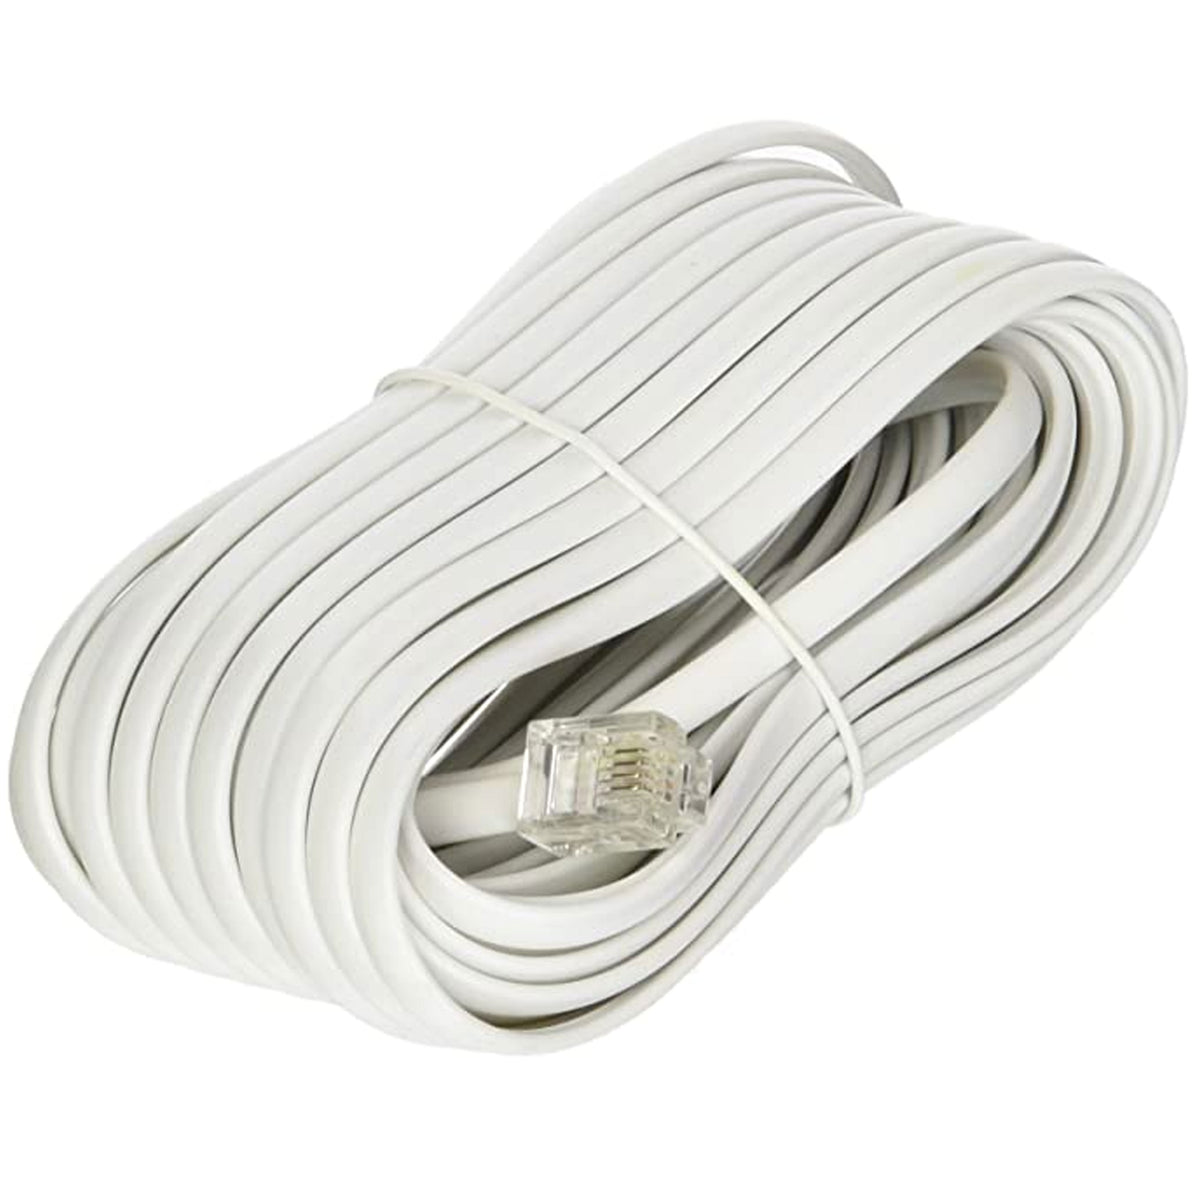 3-PACK) 1 Foot Telephone Cable, RJ11 Male to Male 6P4C Phone Line